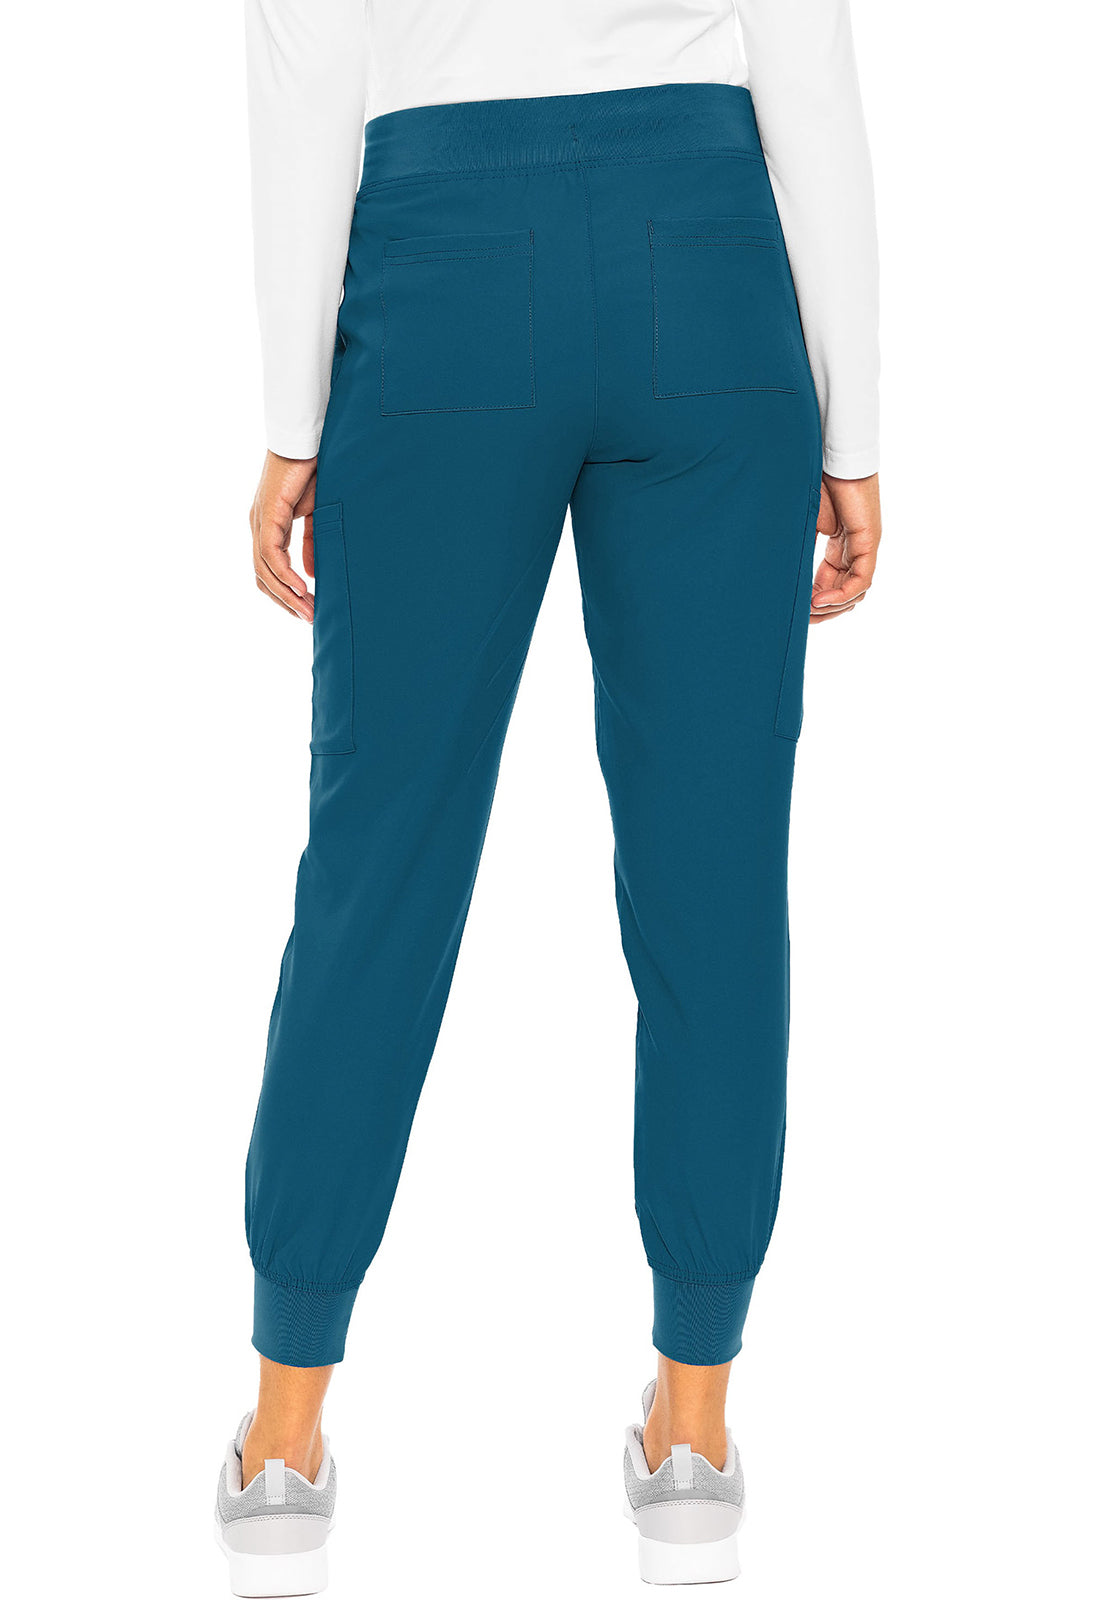 Med Couture 2711 Insight Women's Jogger Pant Caribbean Blue Back